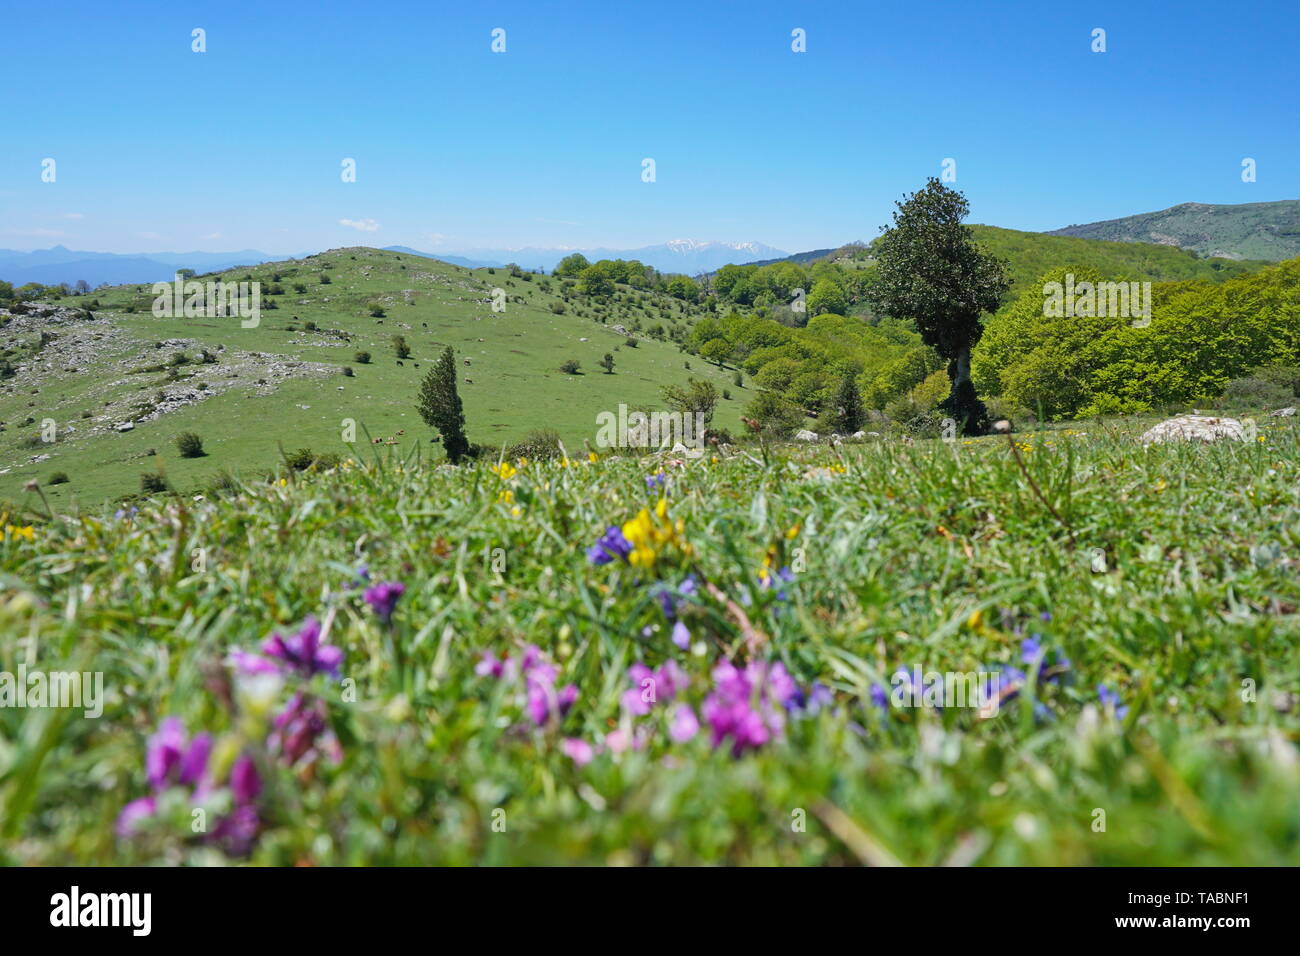 Landscape pasture in the mountain, Massif des Alberes between France and Spain, Pyrenees Orientales, Catalonia Stock Photo